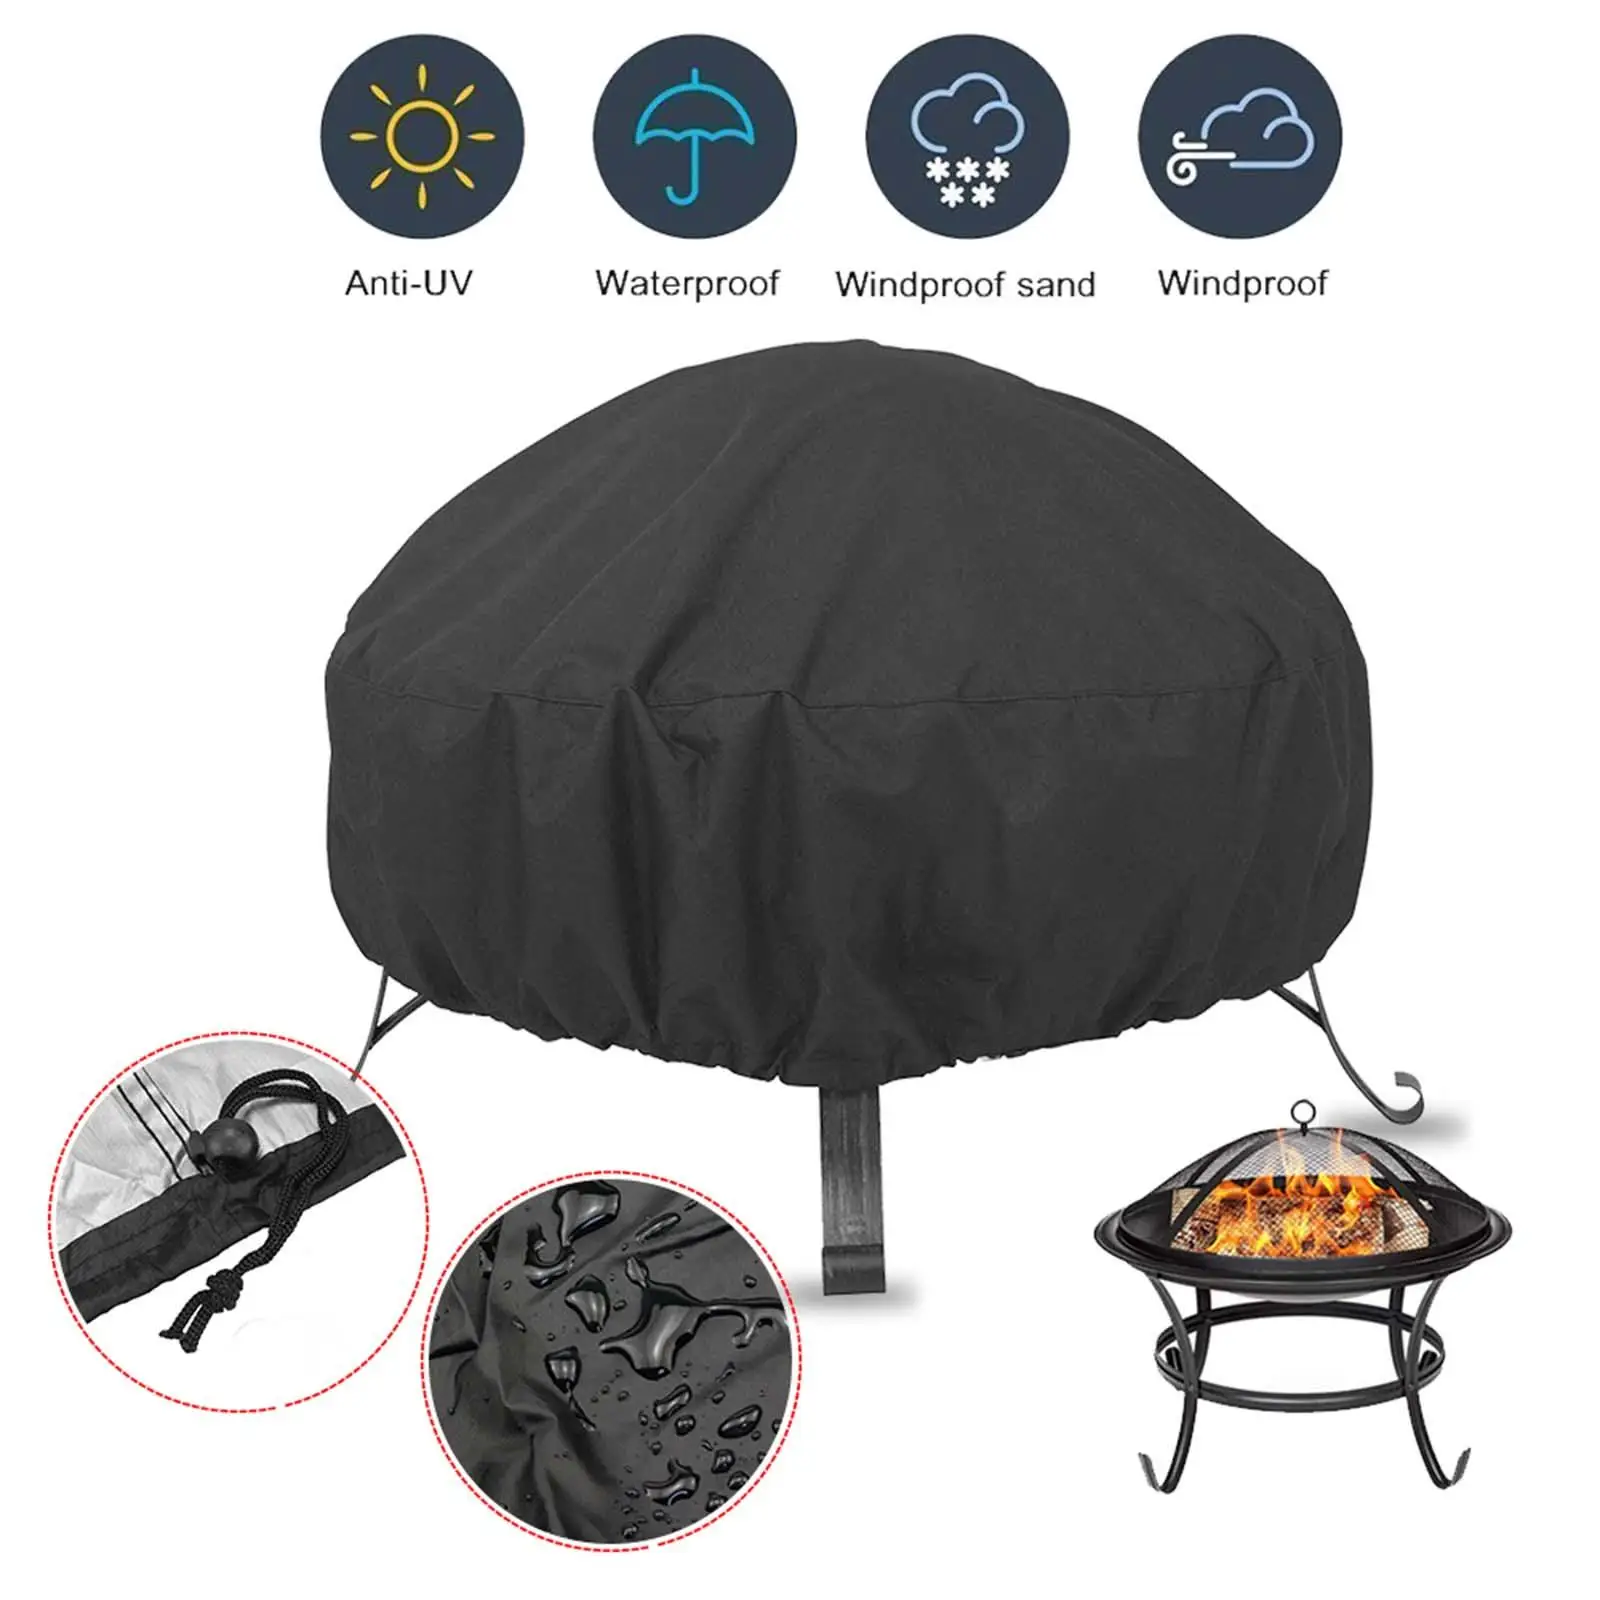 Portable Fire Pit Cover Windproof Outdoor Patio Firepit Sun Protect Durable Brazier Cover for Outdoor Indoor Barbecue Patio